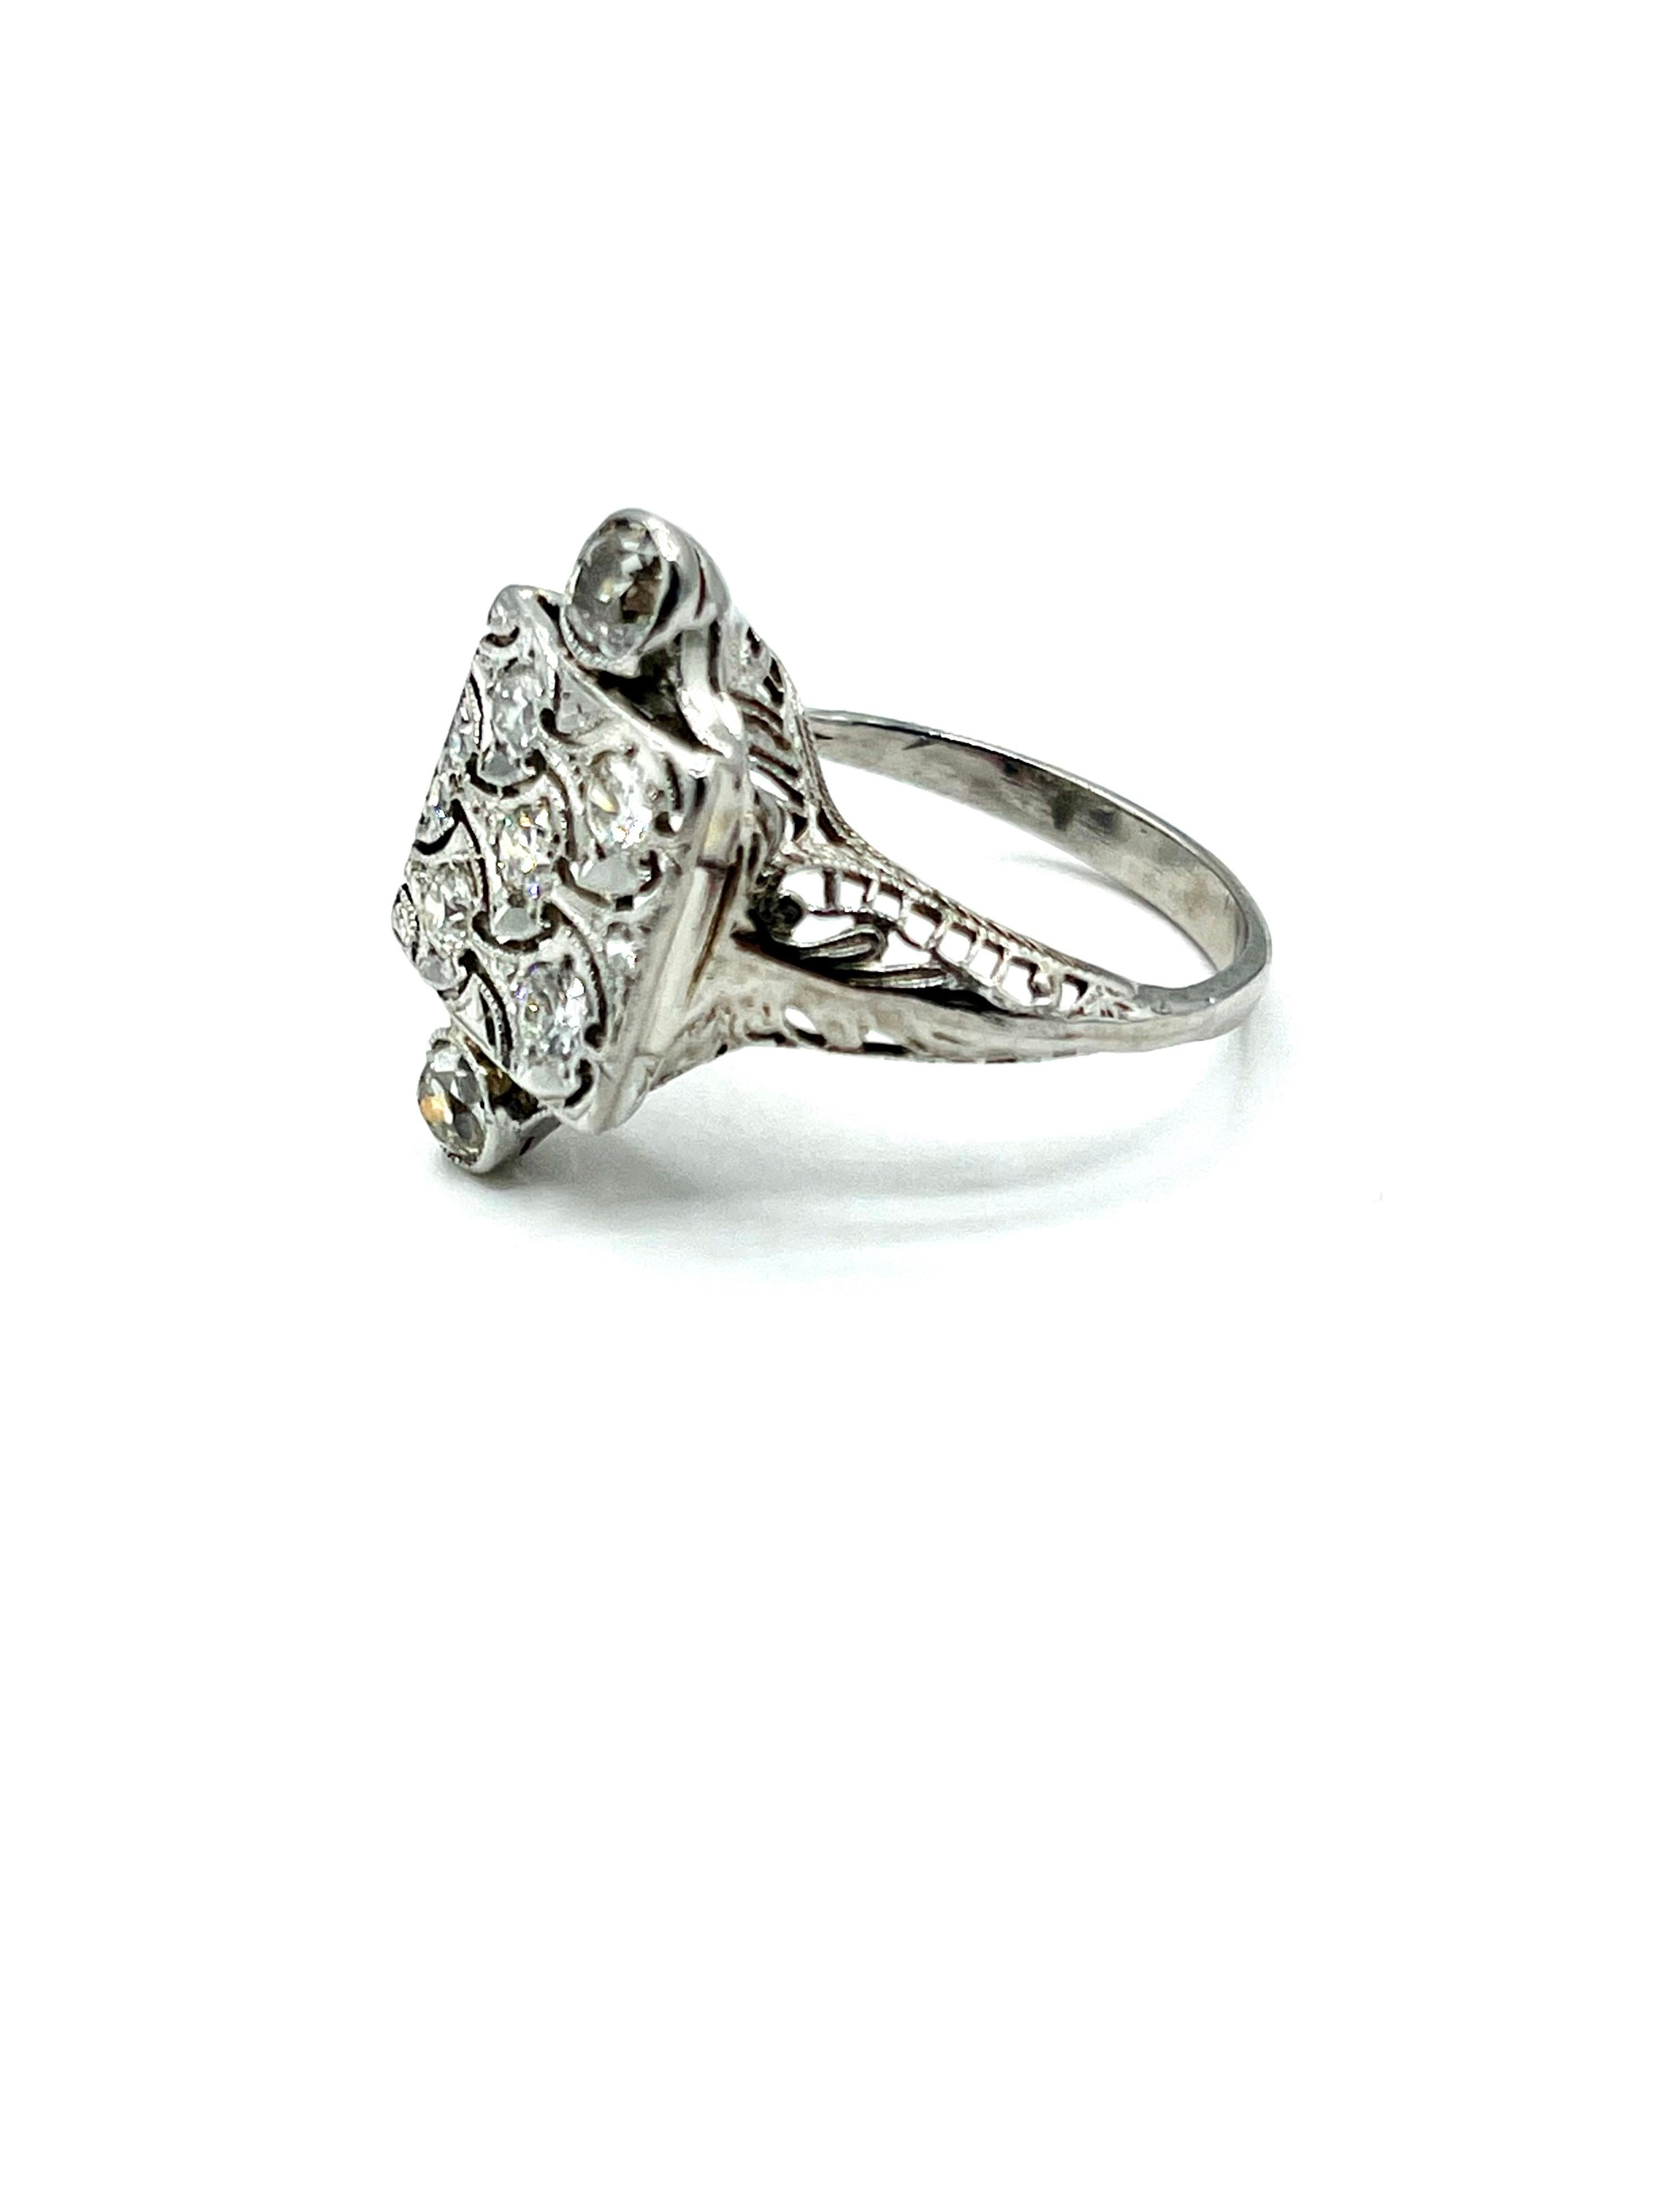 Art Deco Old European Cut Diamond White Gold Cocktail Ring In Excellent Condition For Sale In Chevy Chase, MD